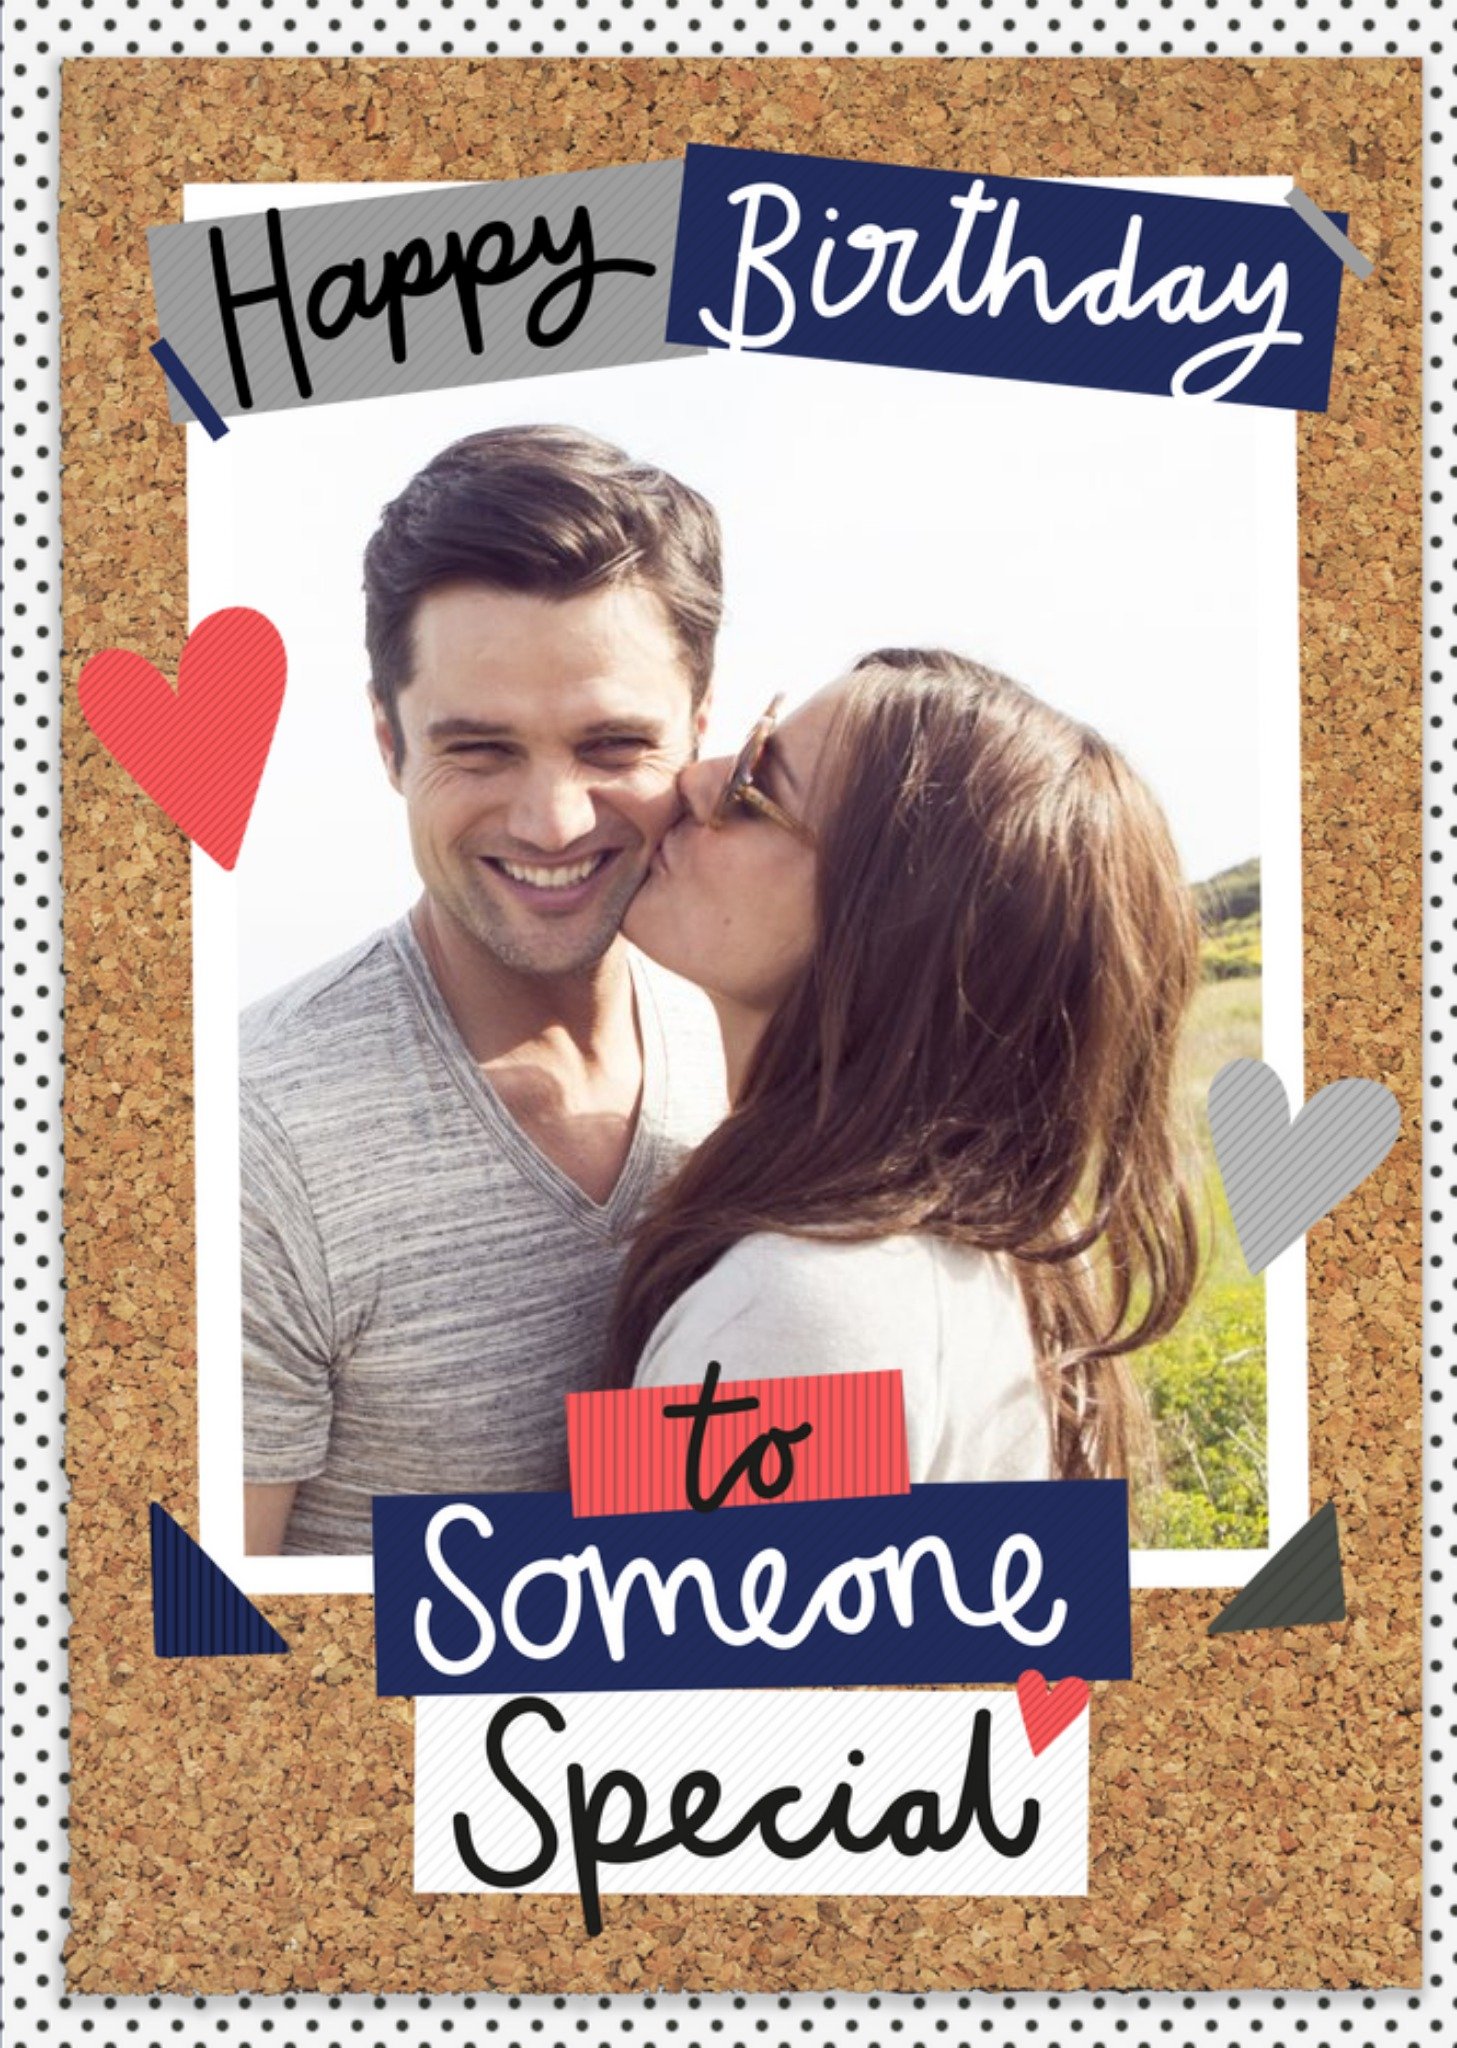 Moonpig Birthday Card - Someone Special - Photo Upload, Large